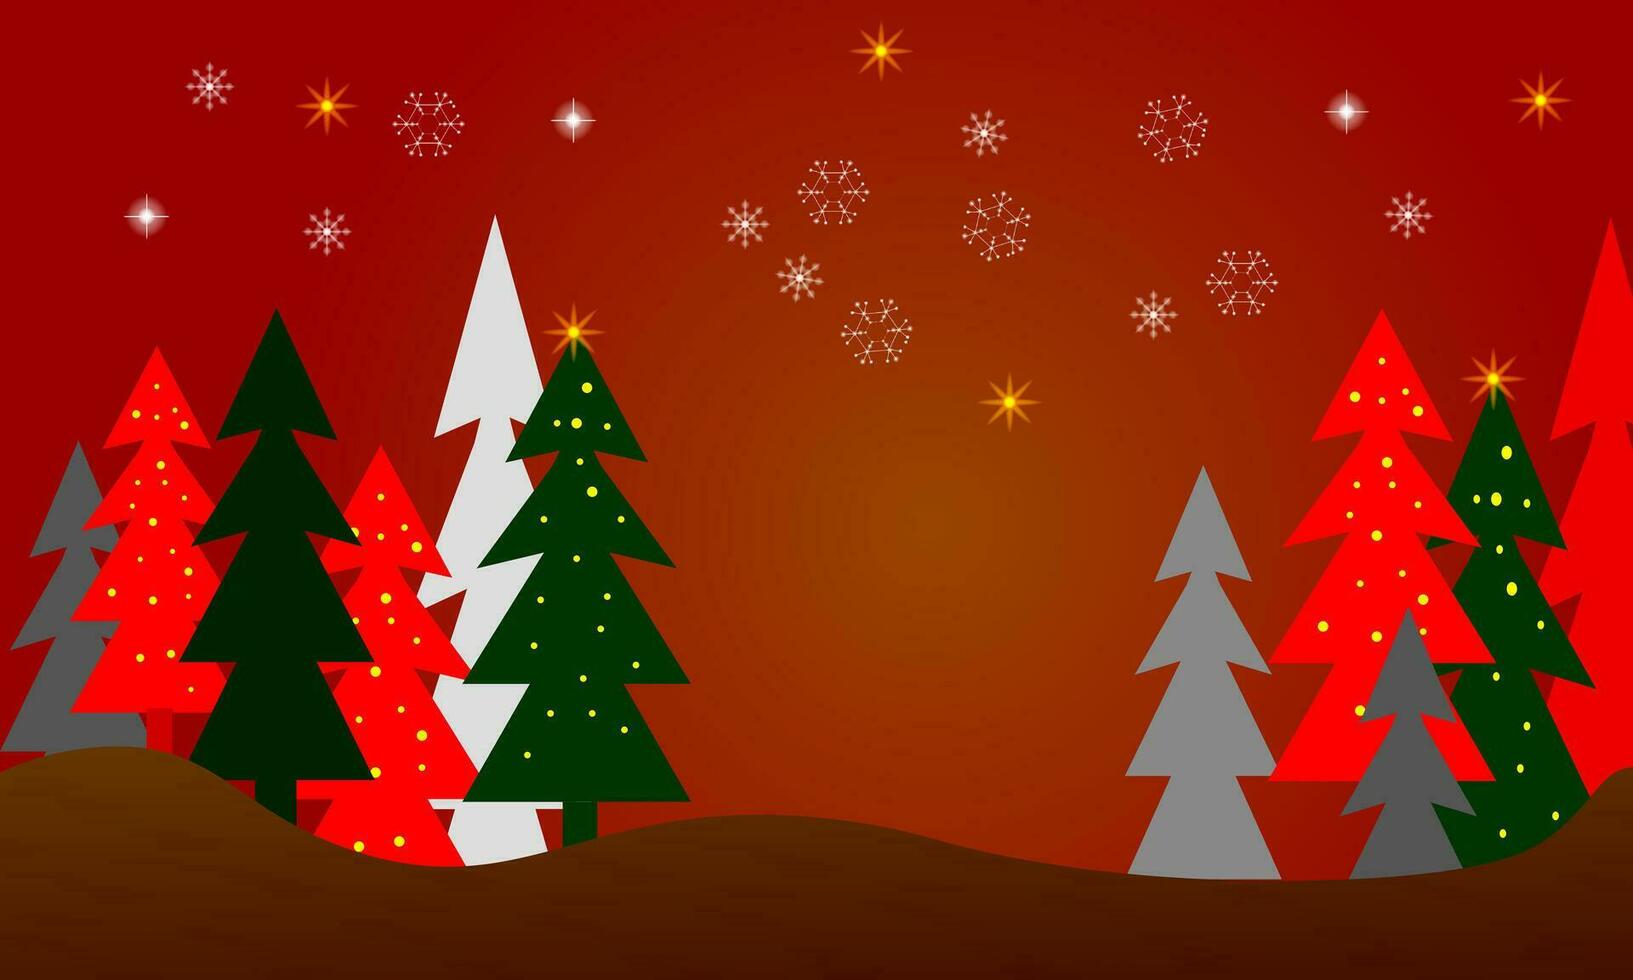 stage pedestal or platform. winter christmas red background with tree xmas. vector